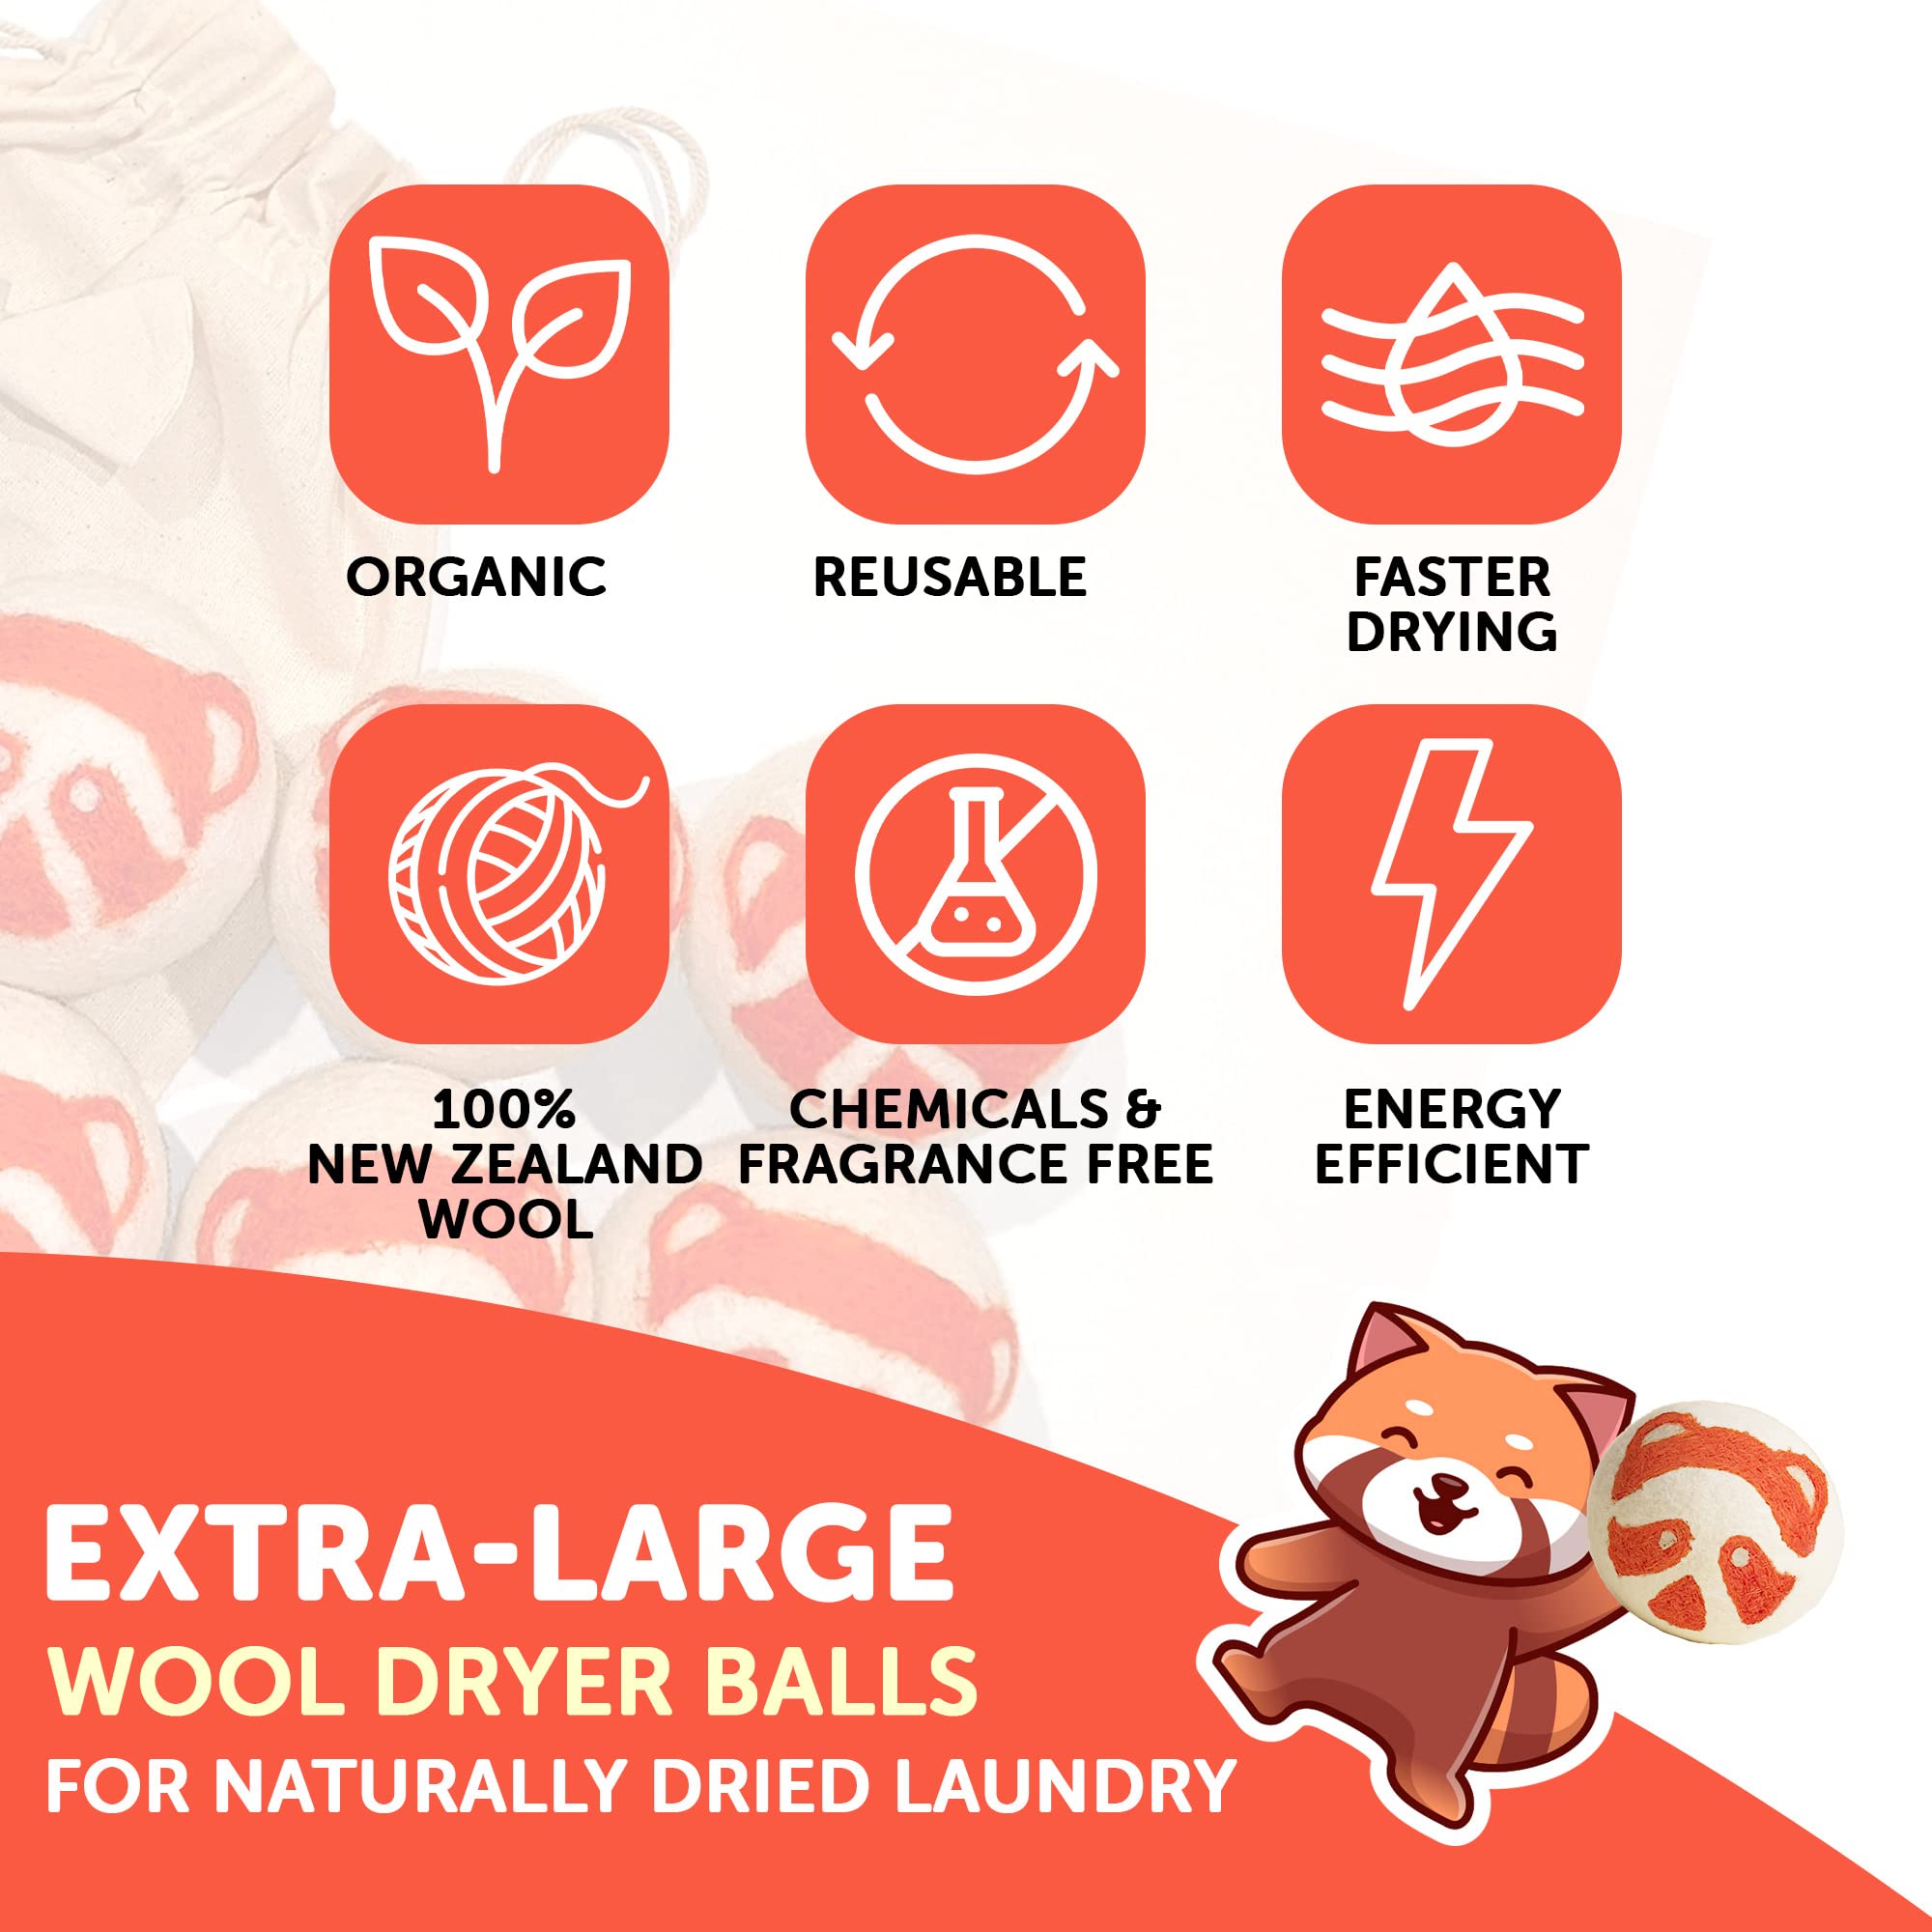 SimplrSpaces Organic Wool Dryer Balls - 6 Pack XL Size Red Panda Cute Dryer Balls Laundry Reusable Replacement for Dryer Sheets, Handmade and Eco Friendly Natural Fabric Softener for Sensitive Skin